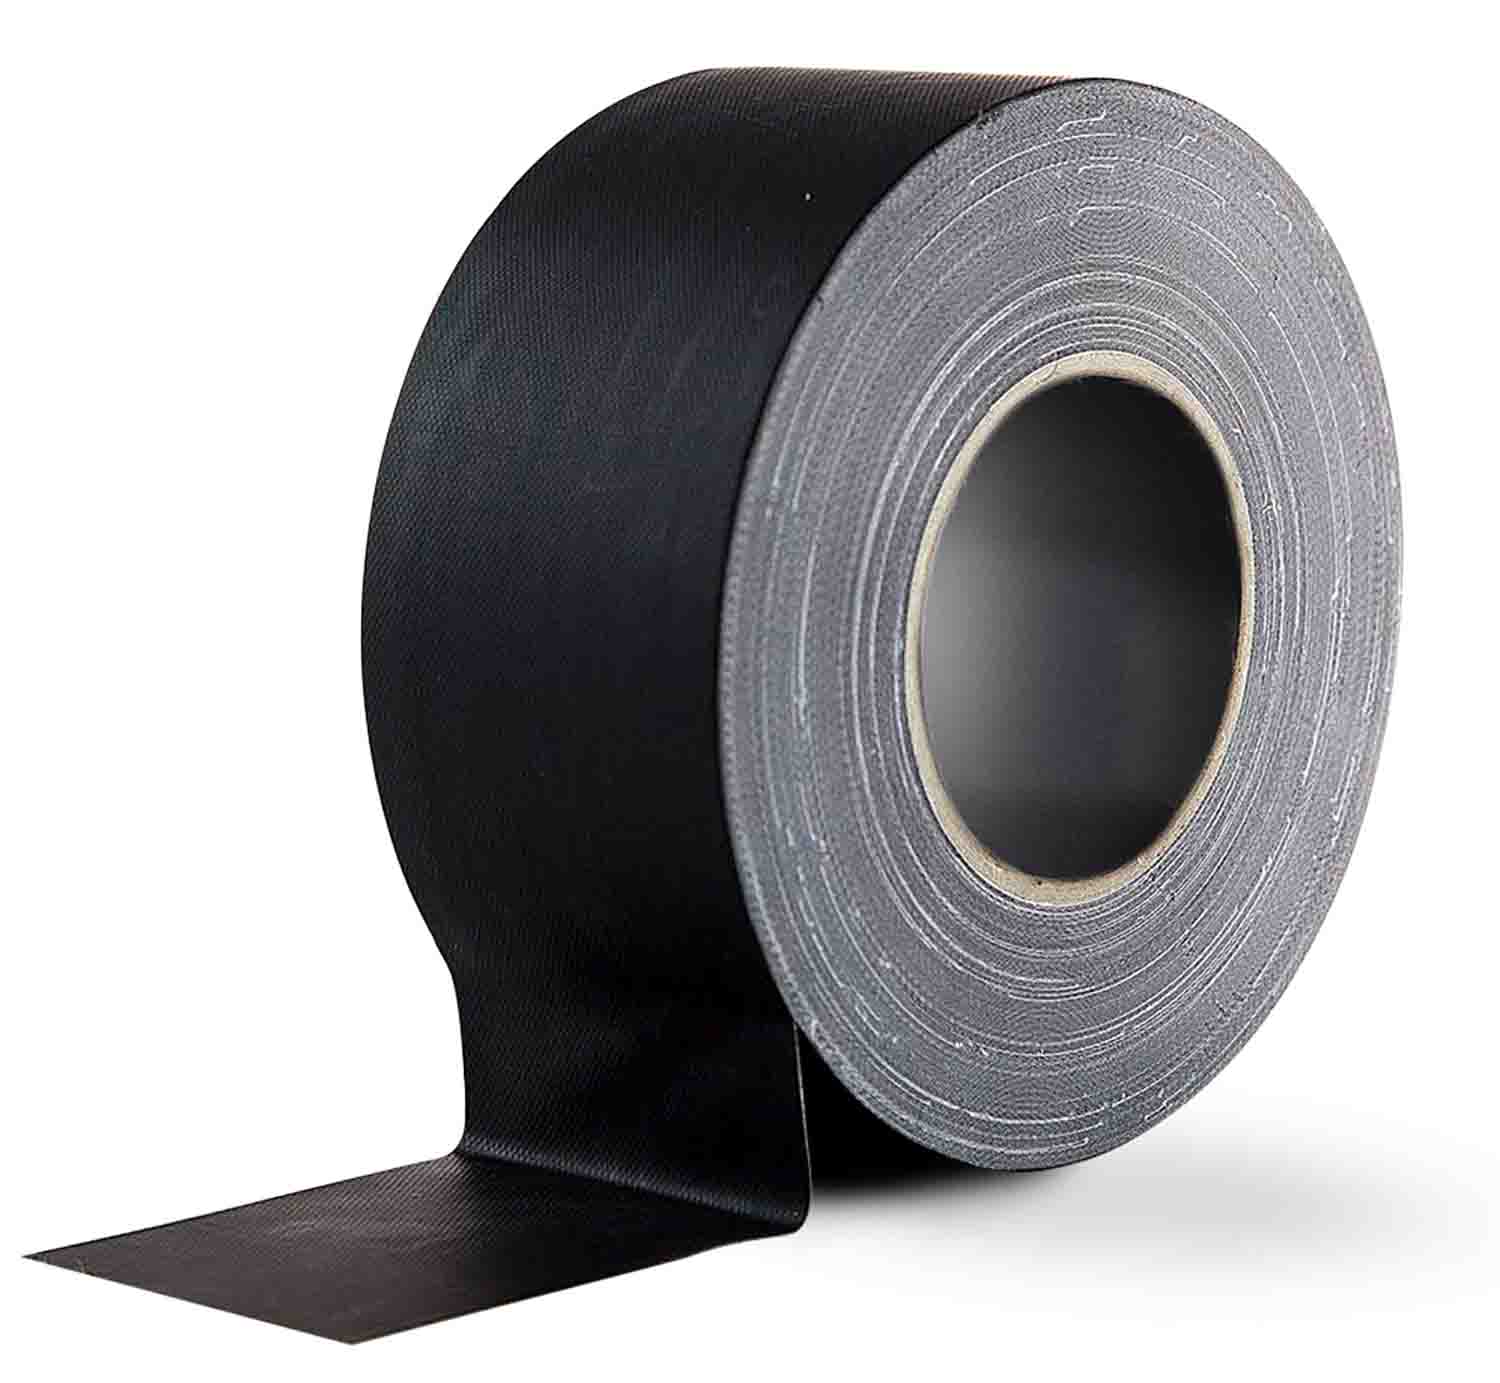 Premium Grade Gaffers Tape, Heavy Duty Non-Reflective Matte No Residue Gaff  Main Stage Tape,Electrical Tape,Duct Tape for Photographers,Waterproof  Gaffer Tape,2 Inch X 10 Yards, White 2 Inch X 10 Yards